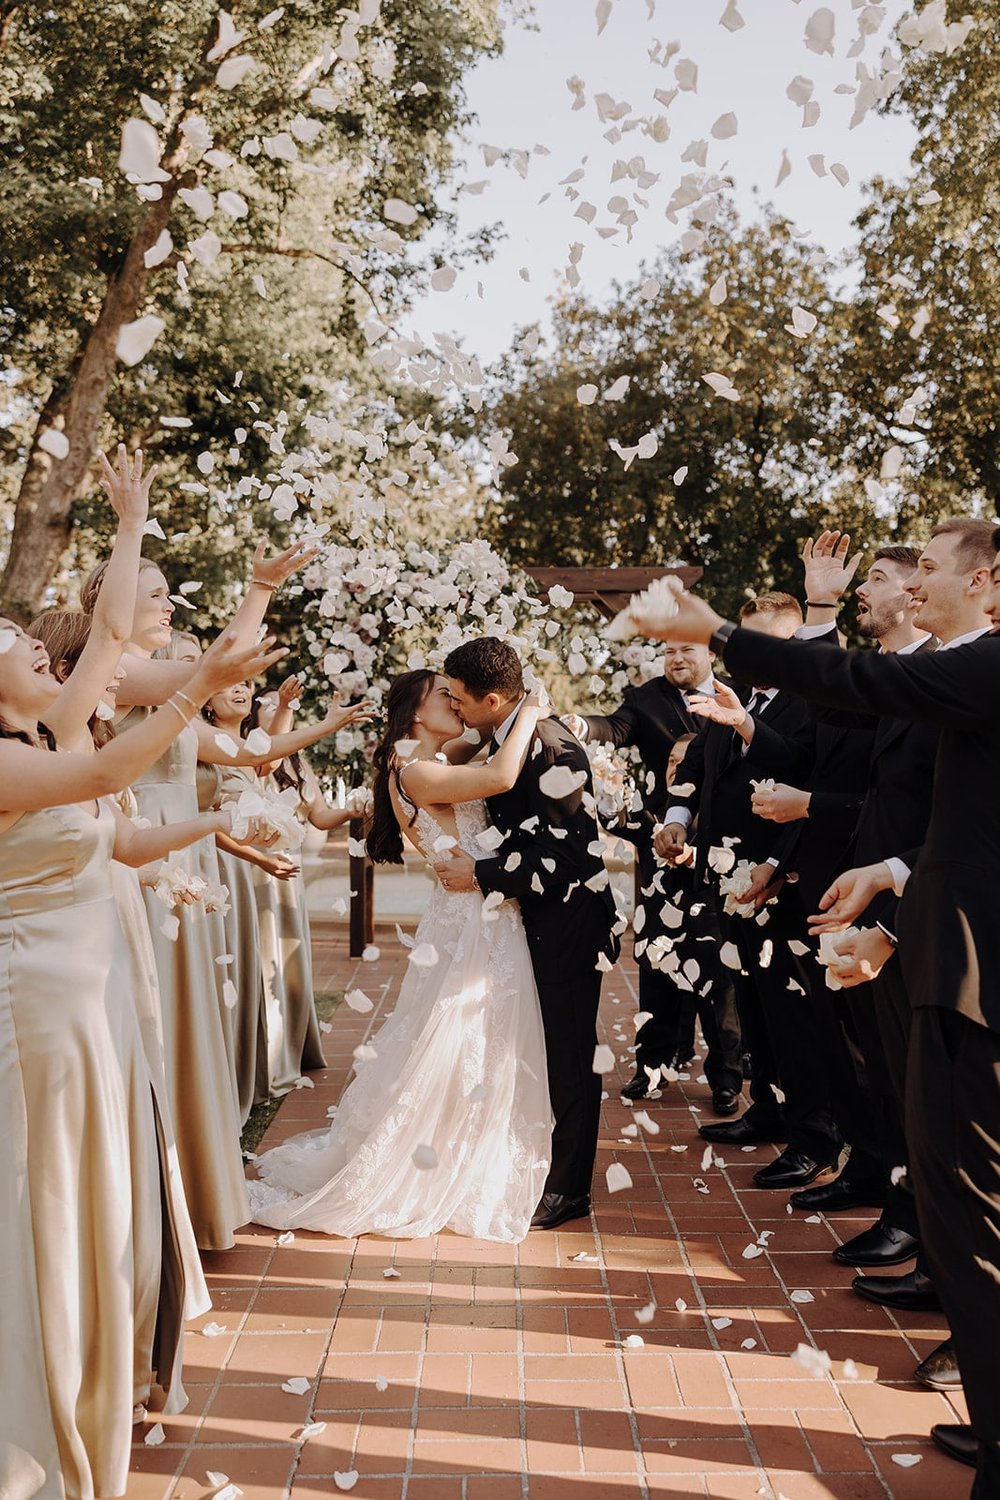 Bride and groom kiss while wedding party throws white petals